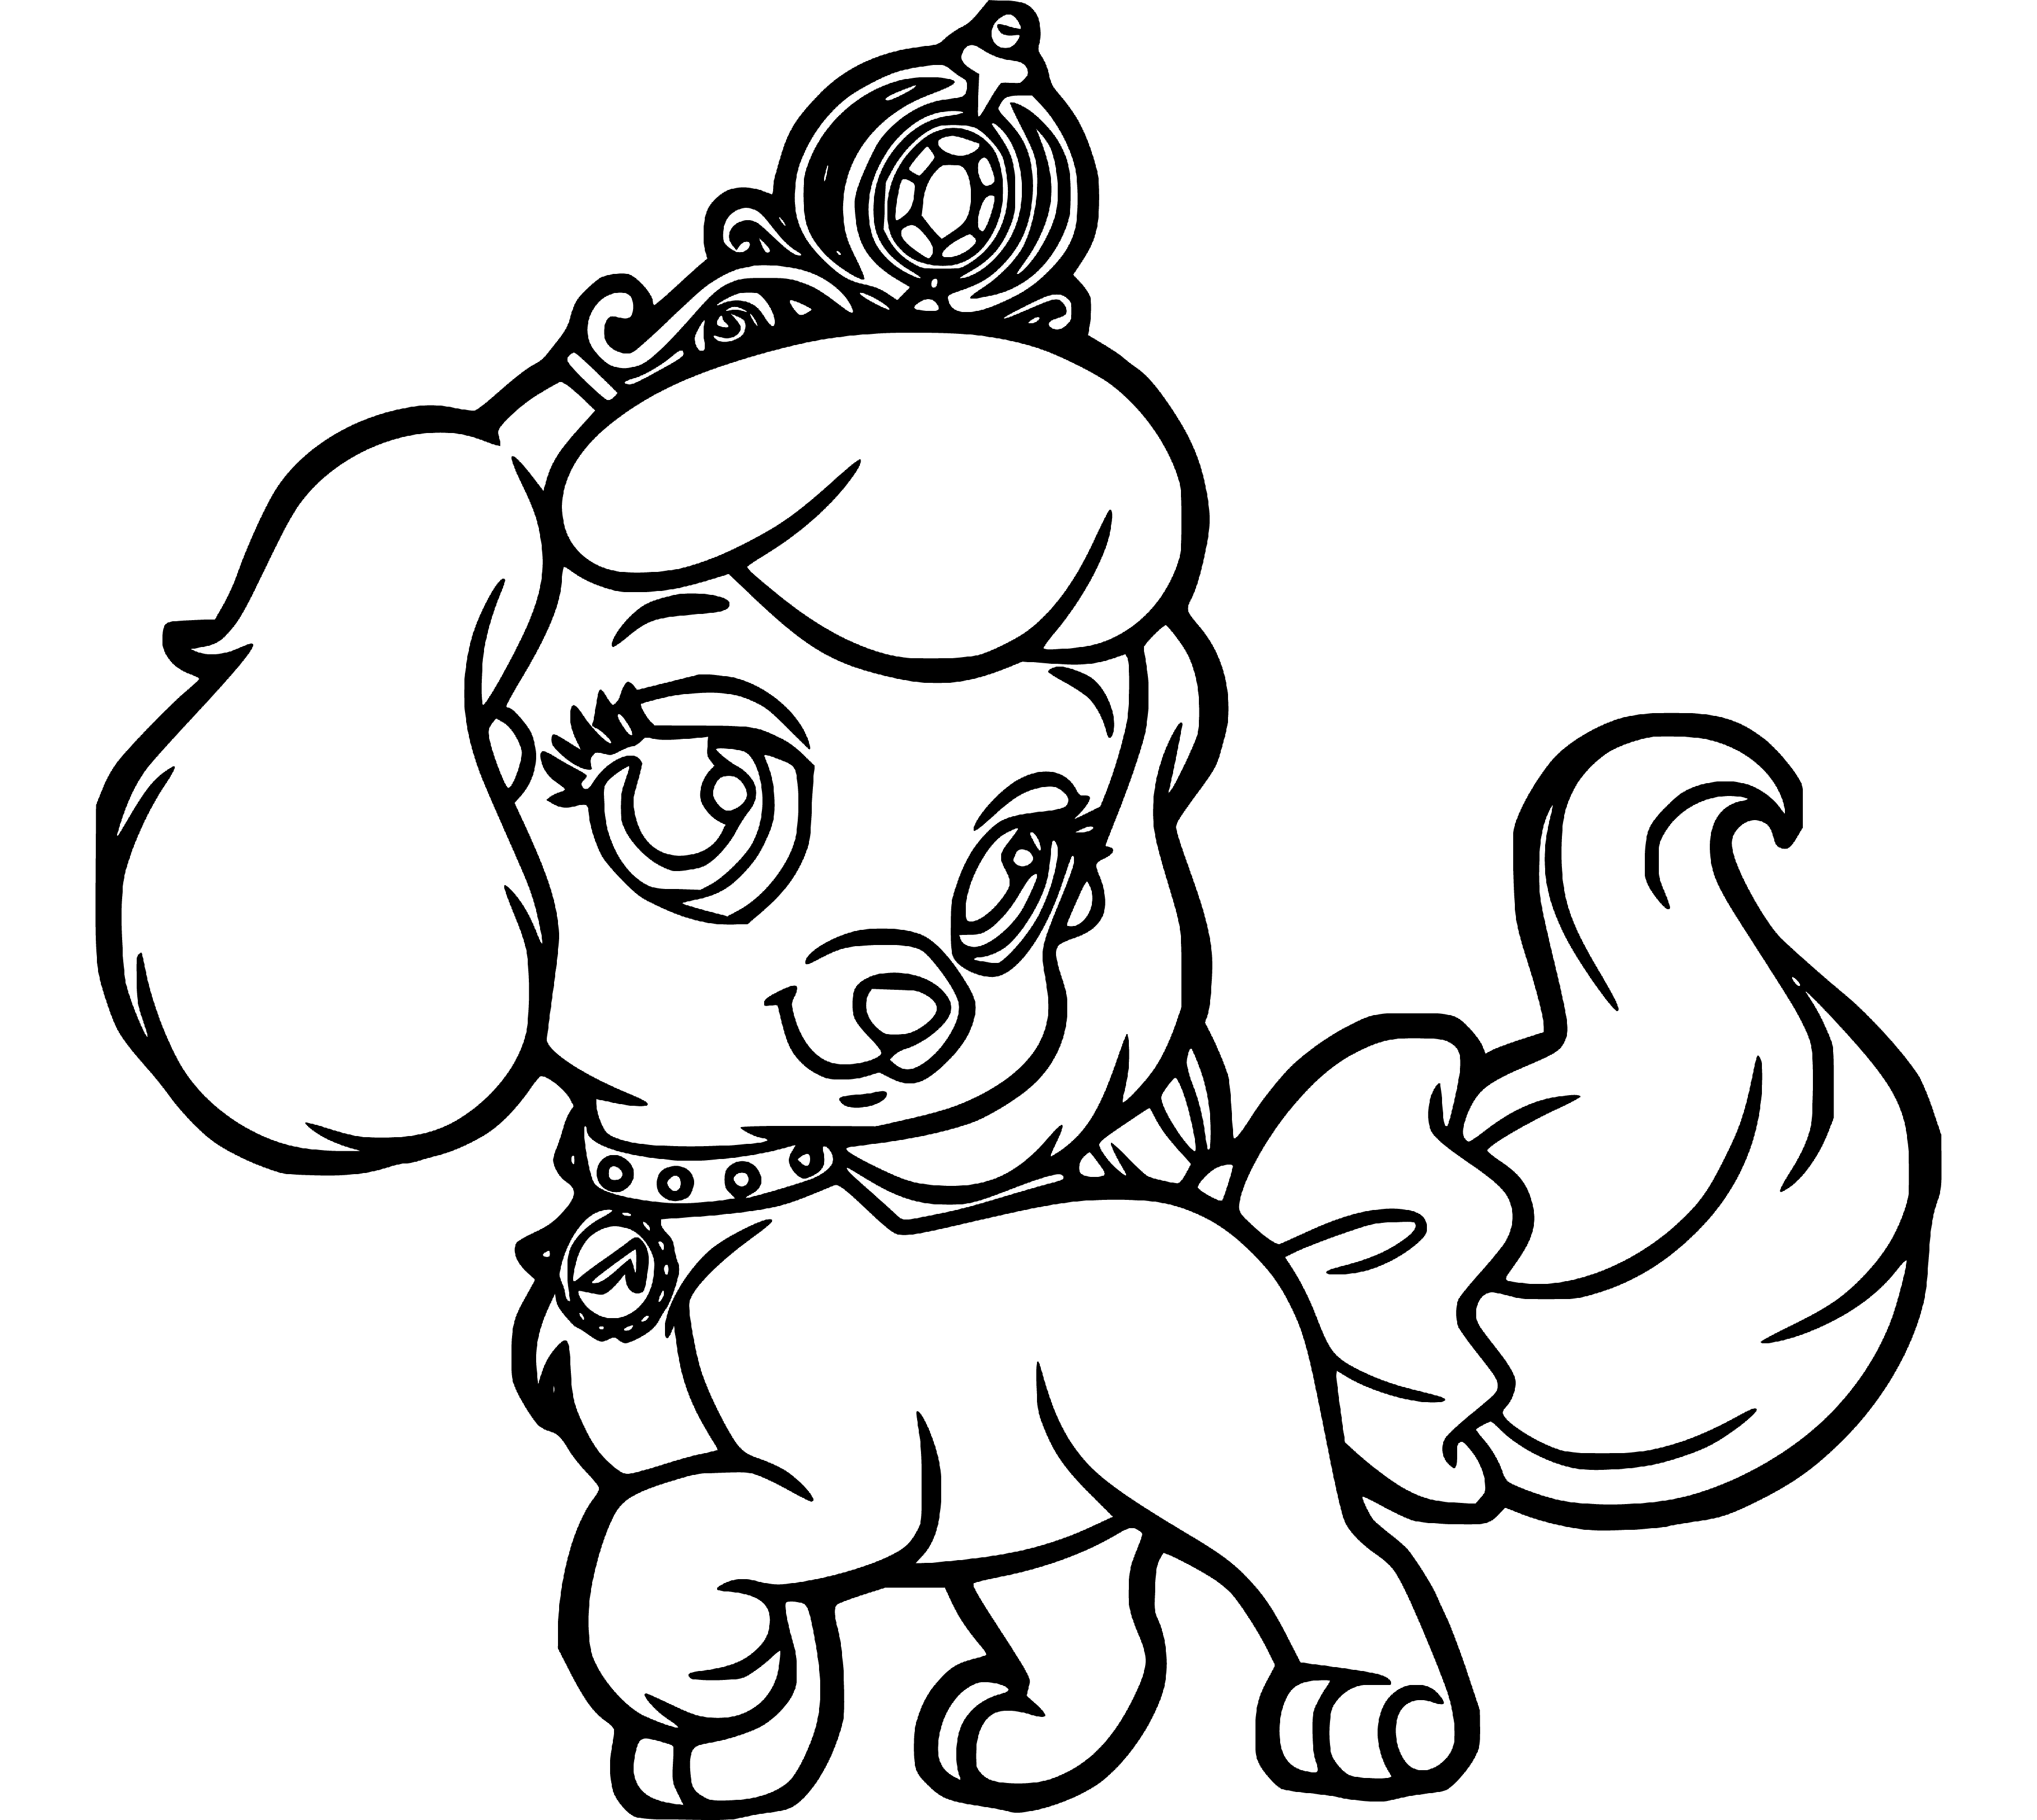 Printable Pretty Puppy Coloring Page for kids.